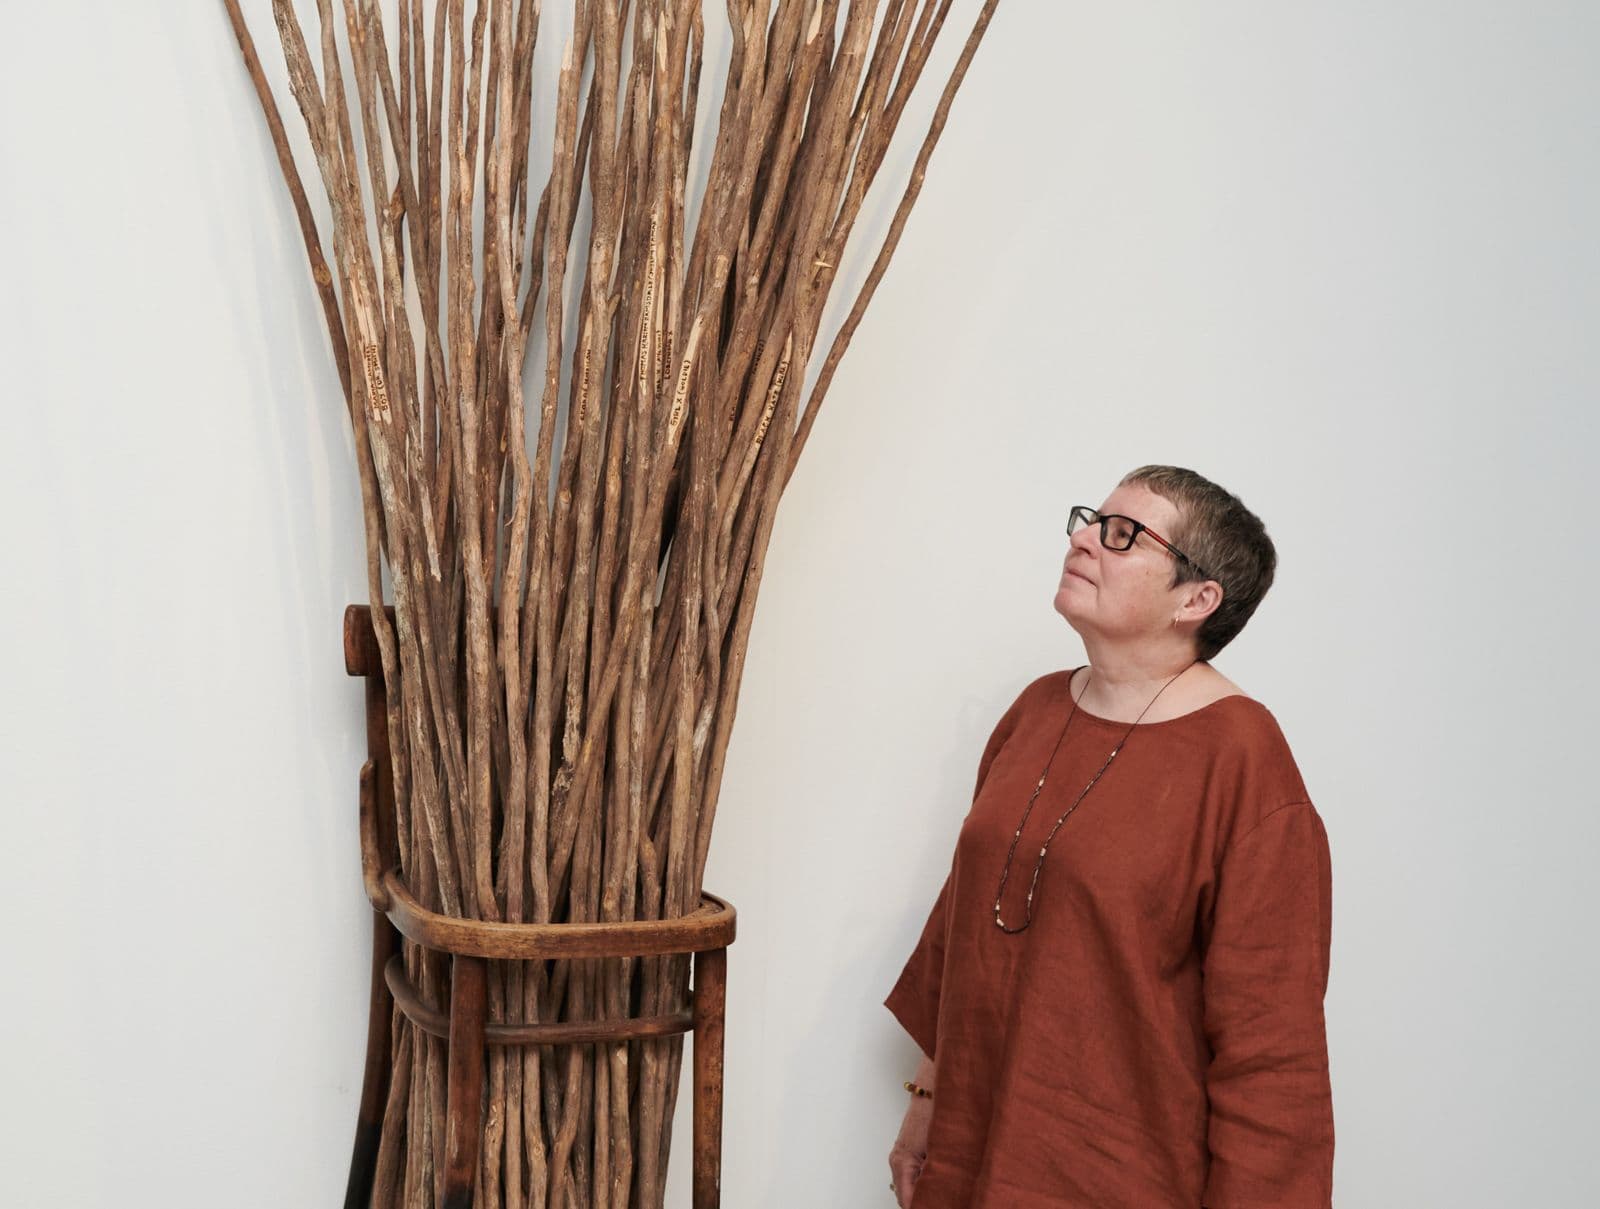 Image of artist Julie Gough standing with her work comprised of a bunch of wooden spears